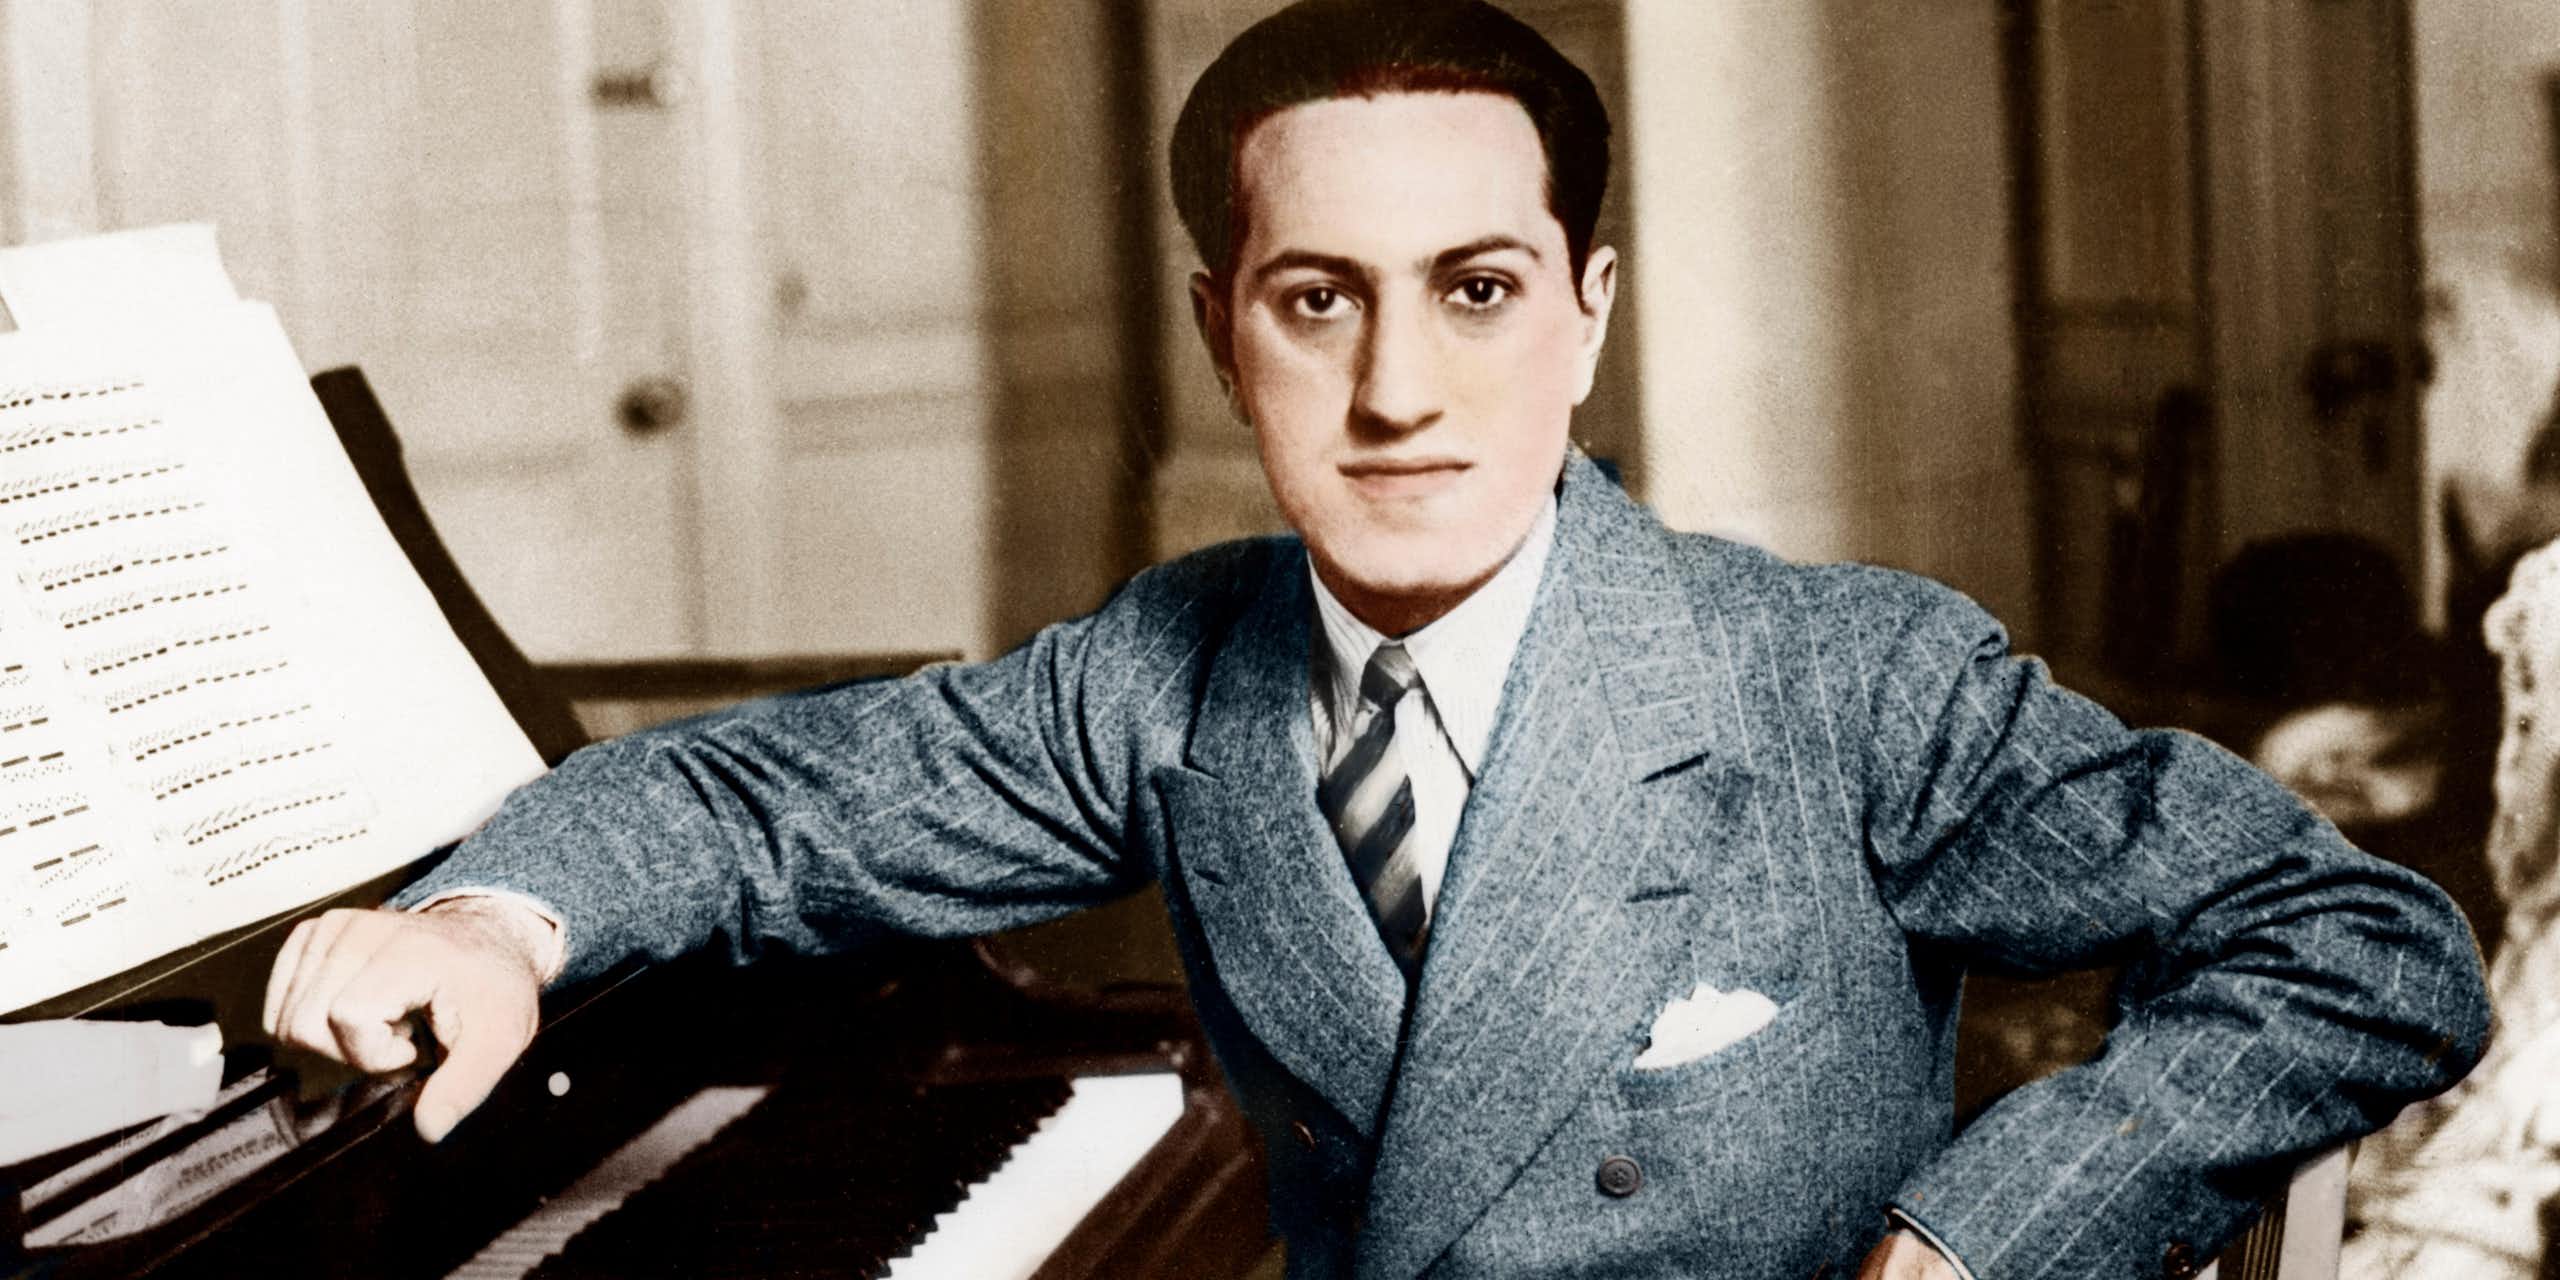 A young 1920s man (George Gershwin) sitting at a piano.